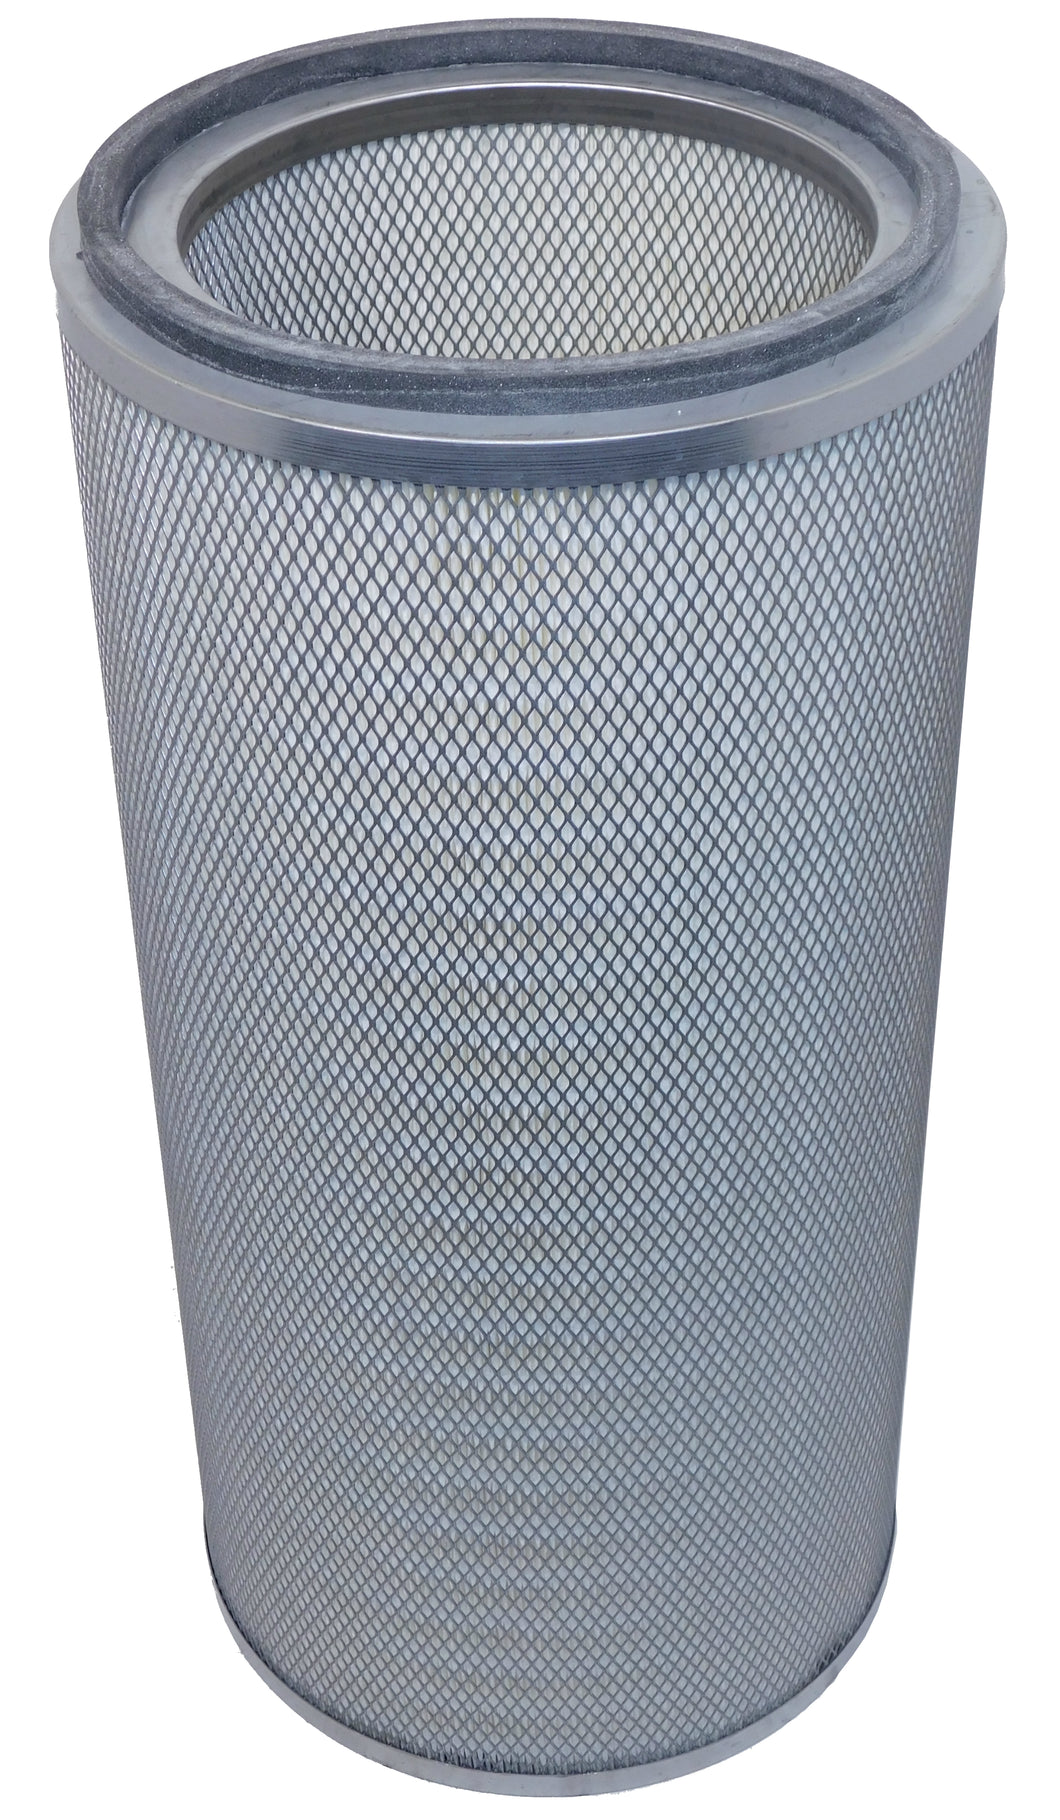 Replacement Filter for P030904-016-436 Donaldson Torit